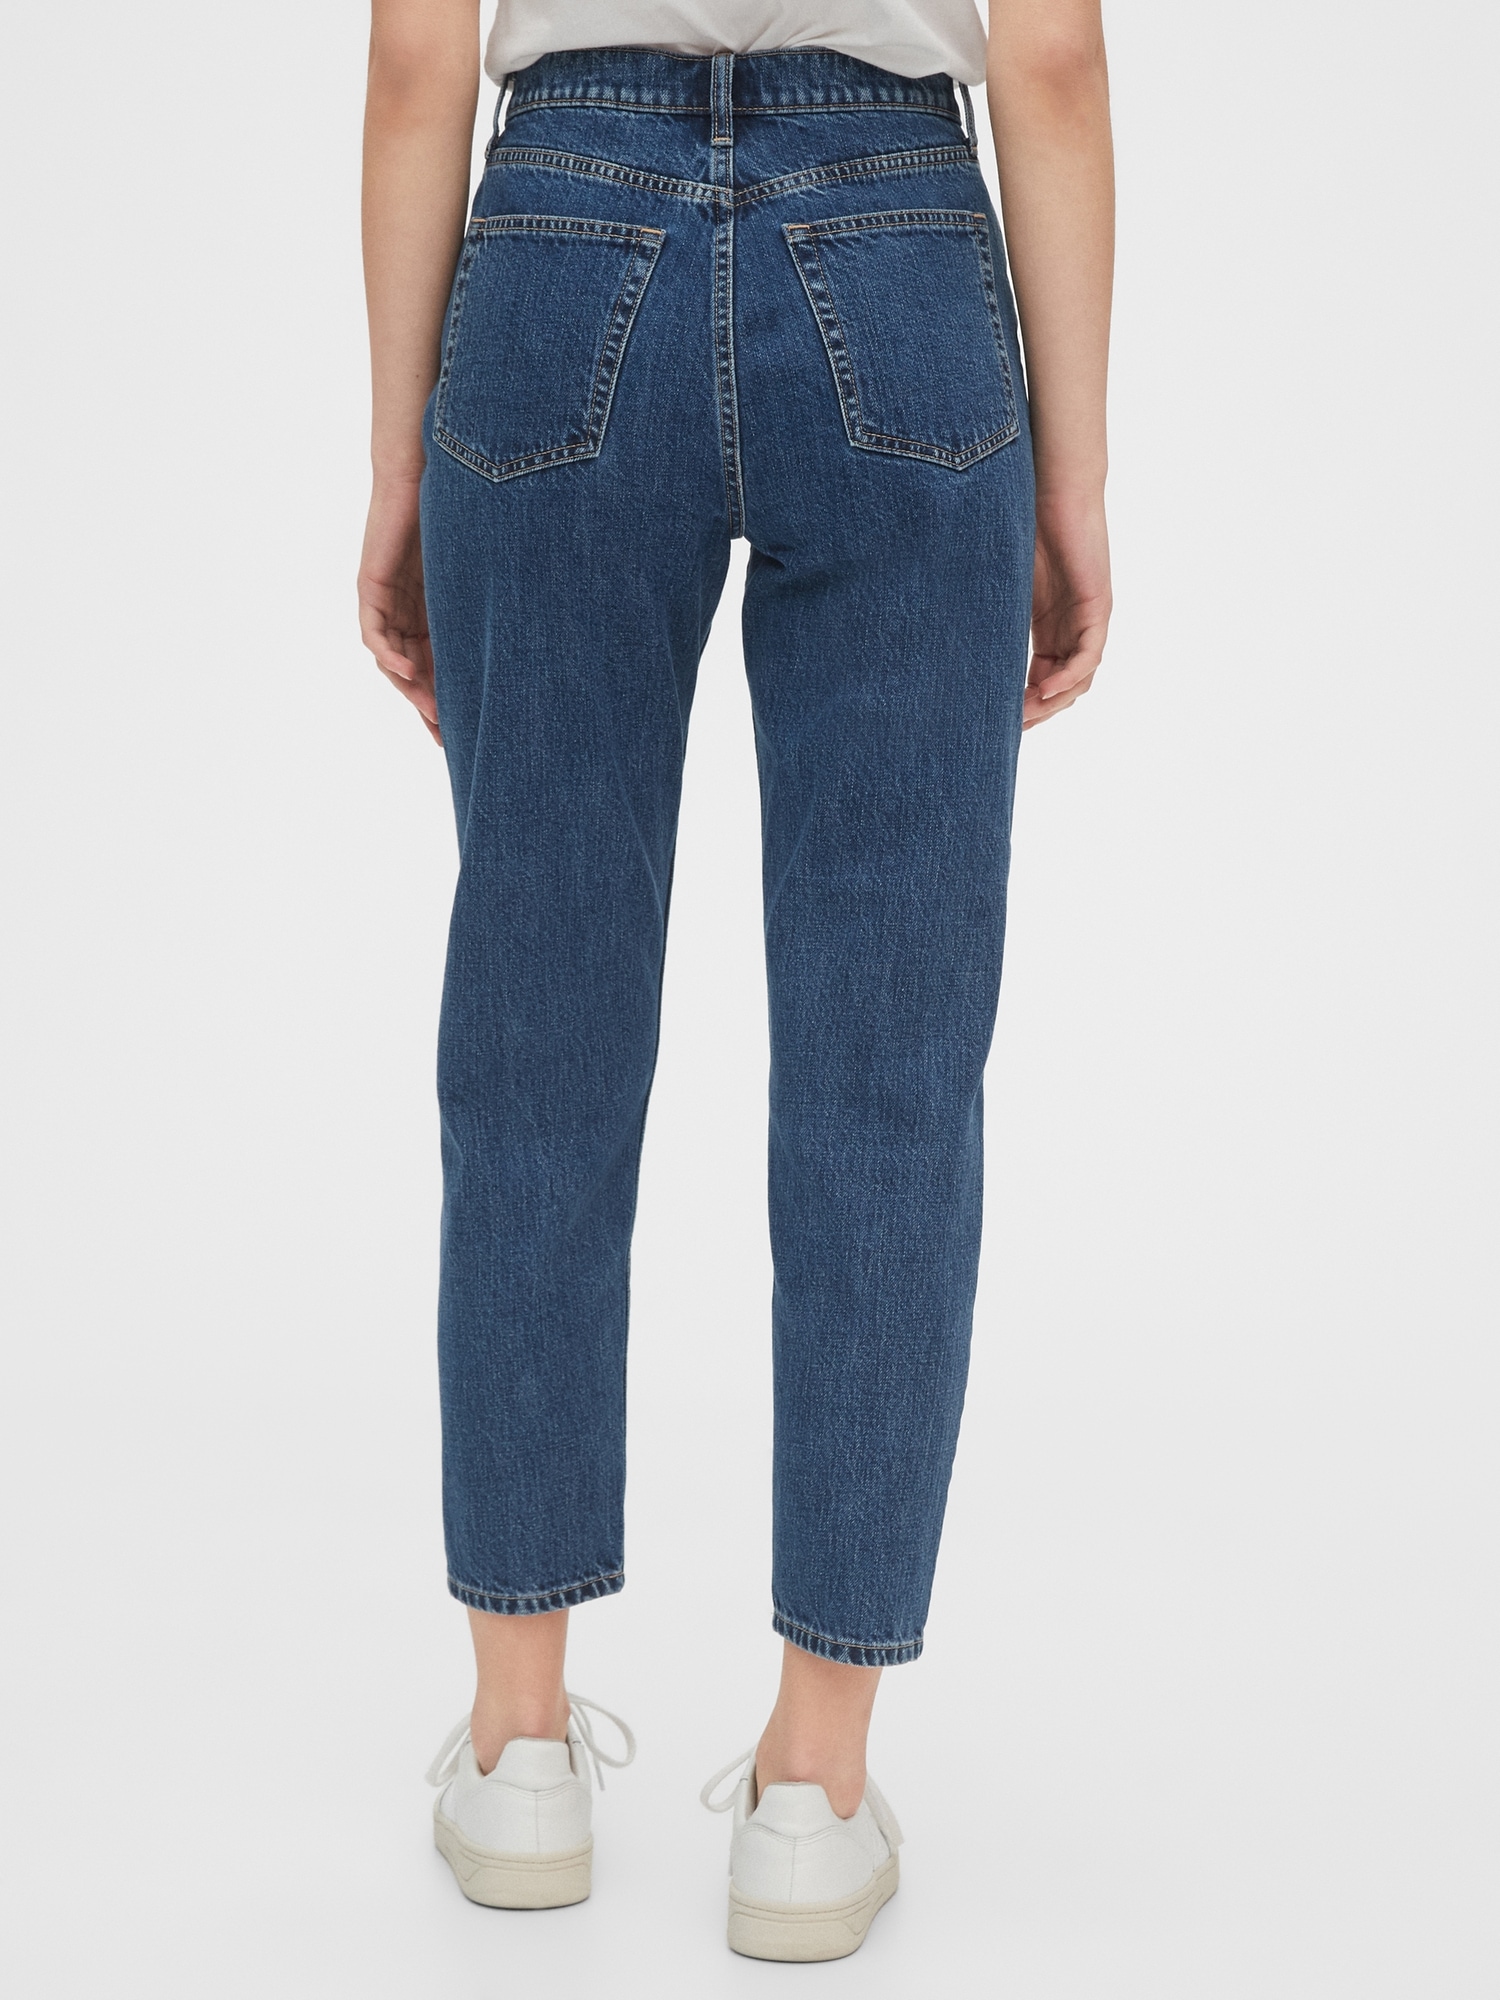 mother petite jeans